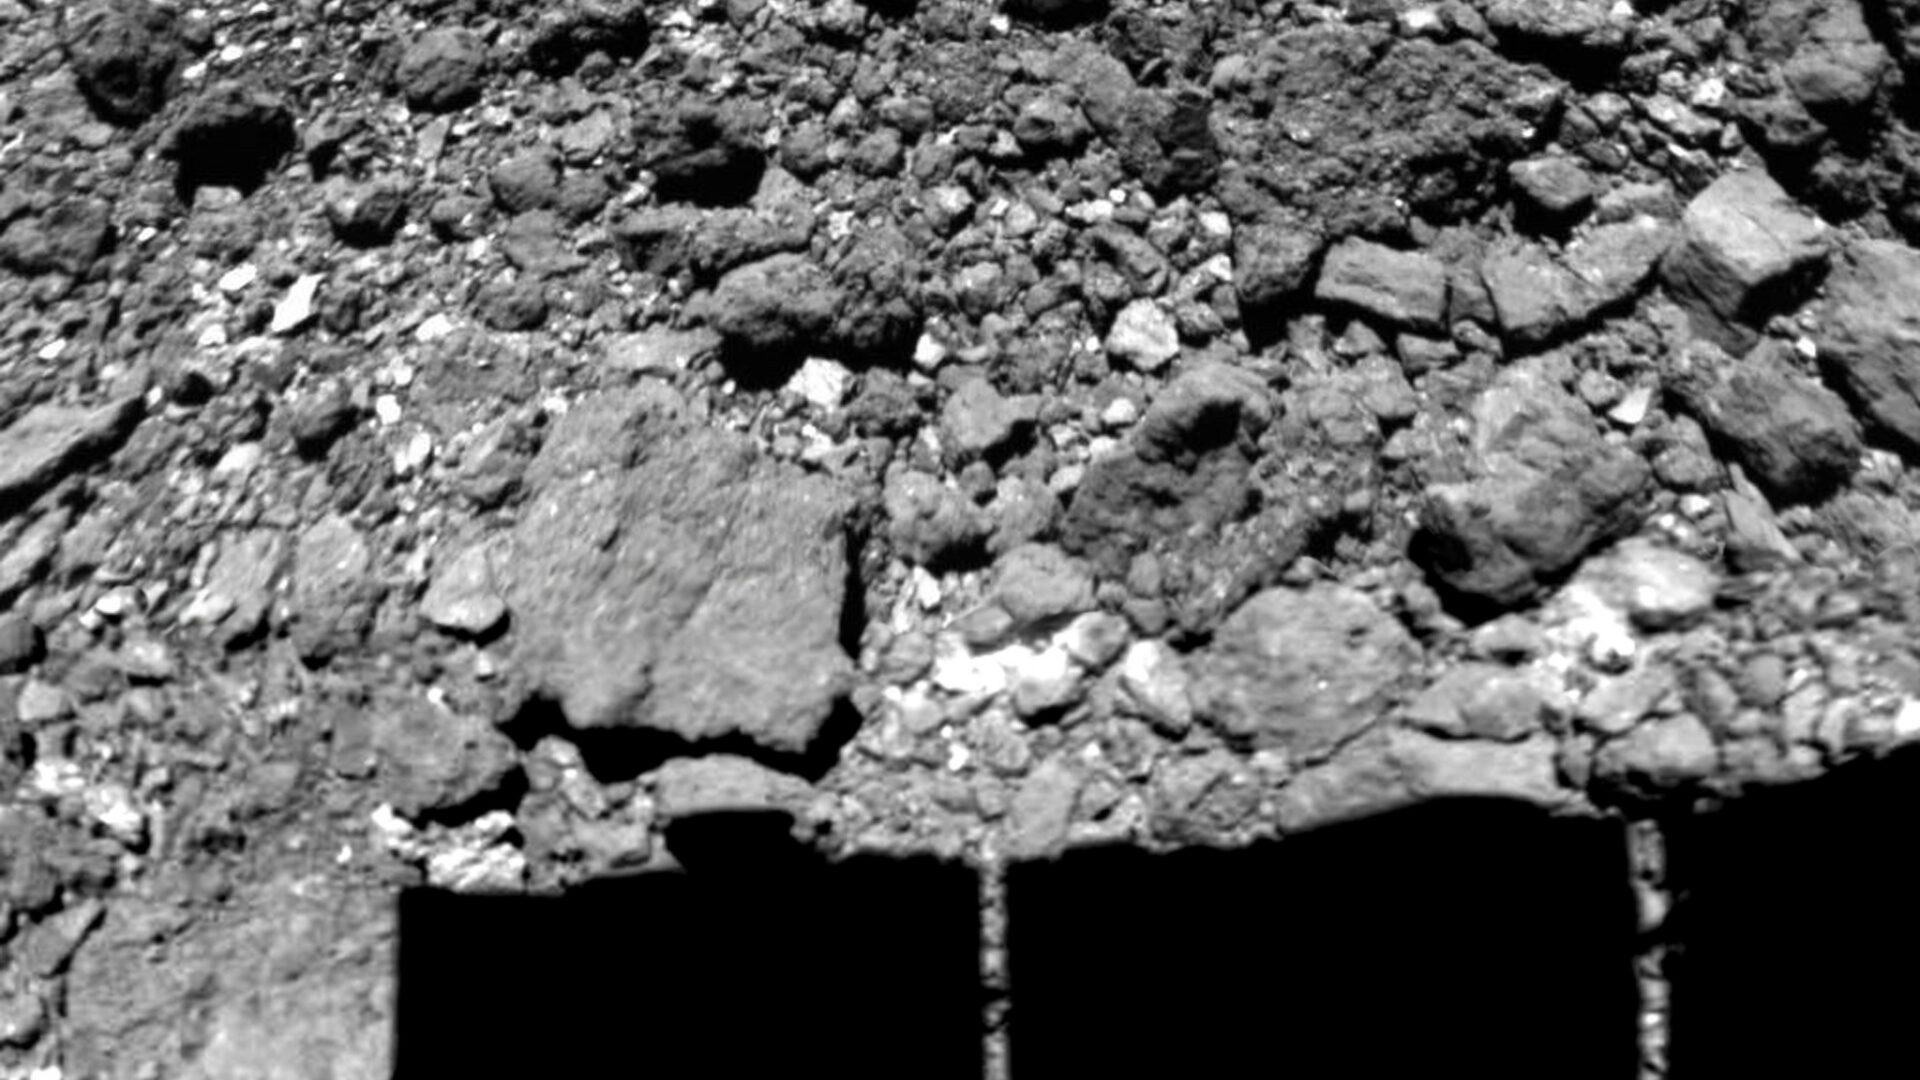 Materials older than the Solar system were found in samples from the Ryugu asteroid